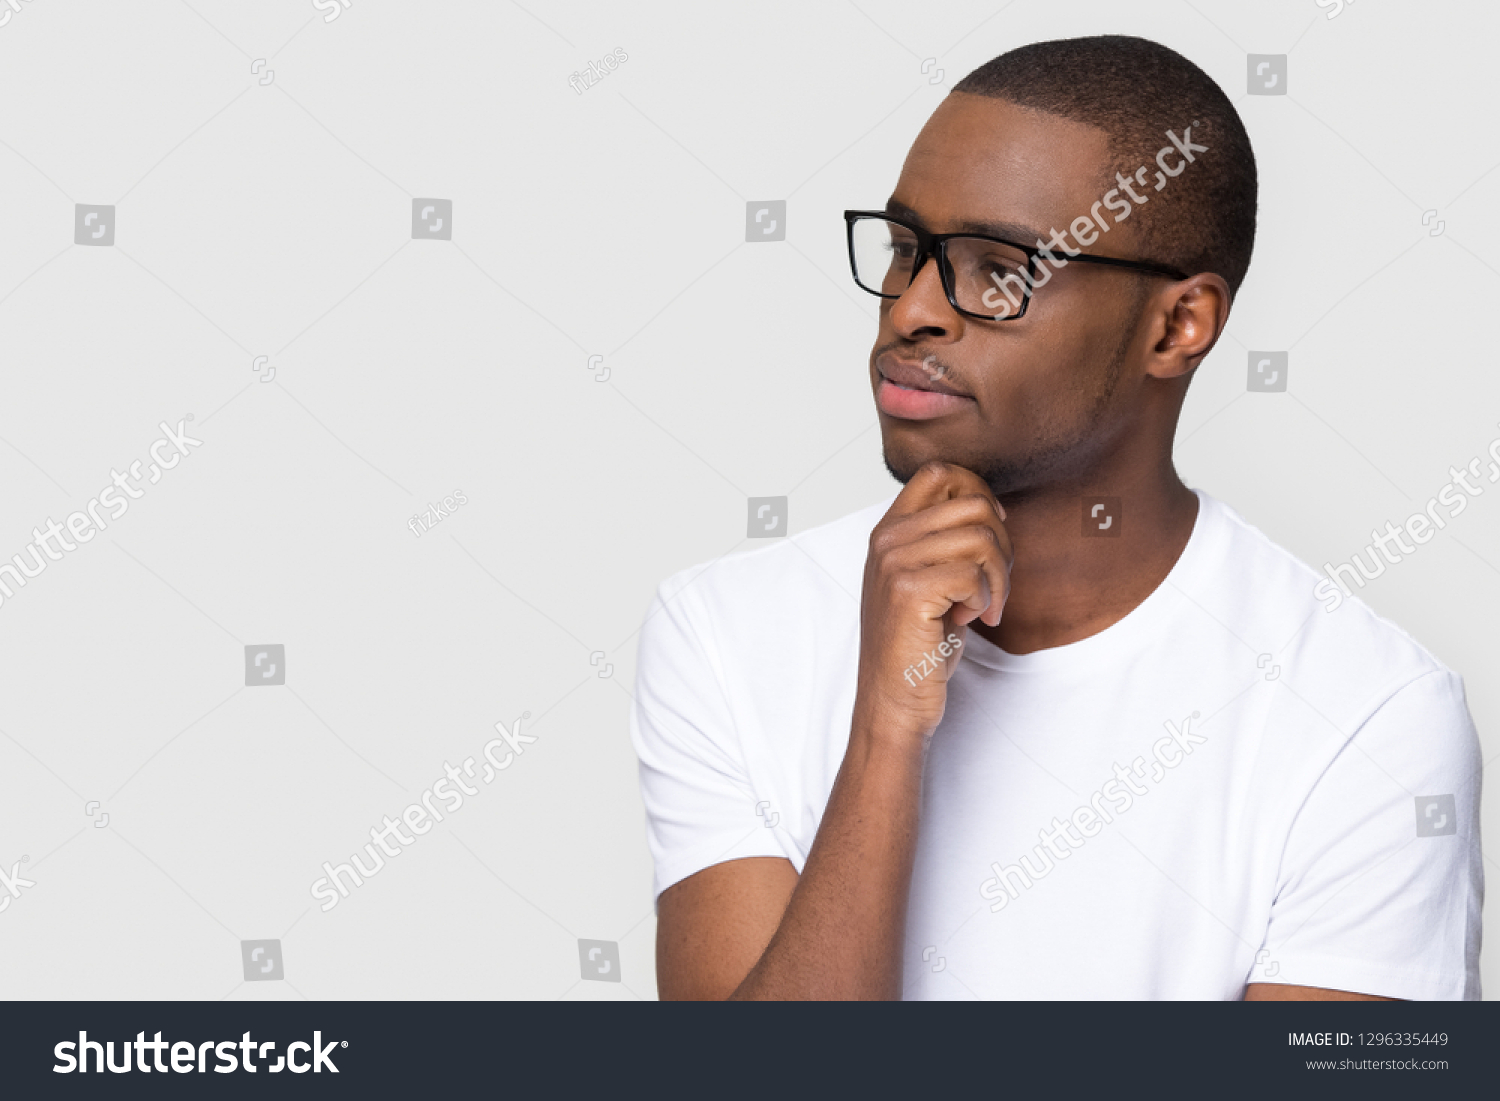 Thoughtful african man holding hand on chin looking at copy space feeling uncertain, doubtful black guy with unsure face thinking considering making decision isolated on white grey studio background #1296335449